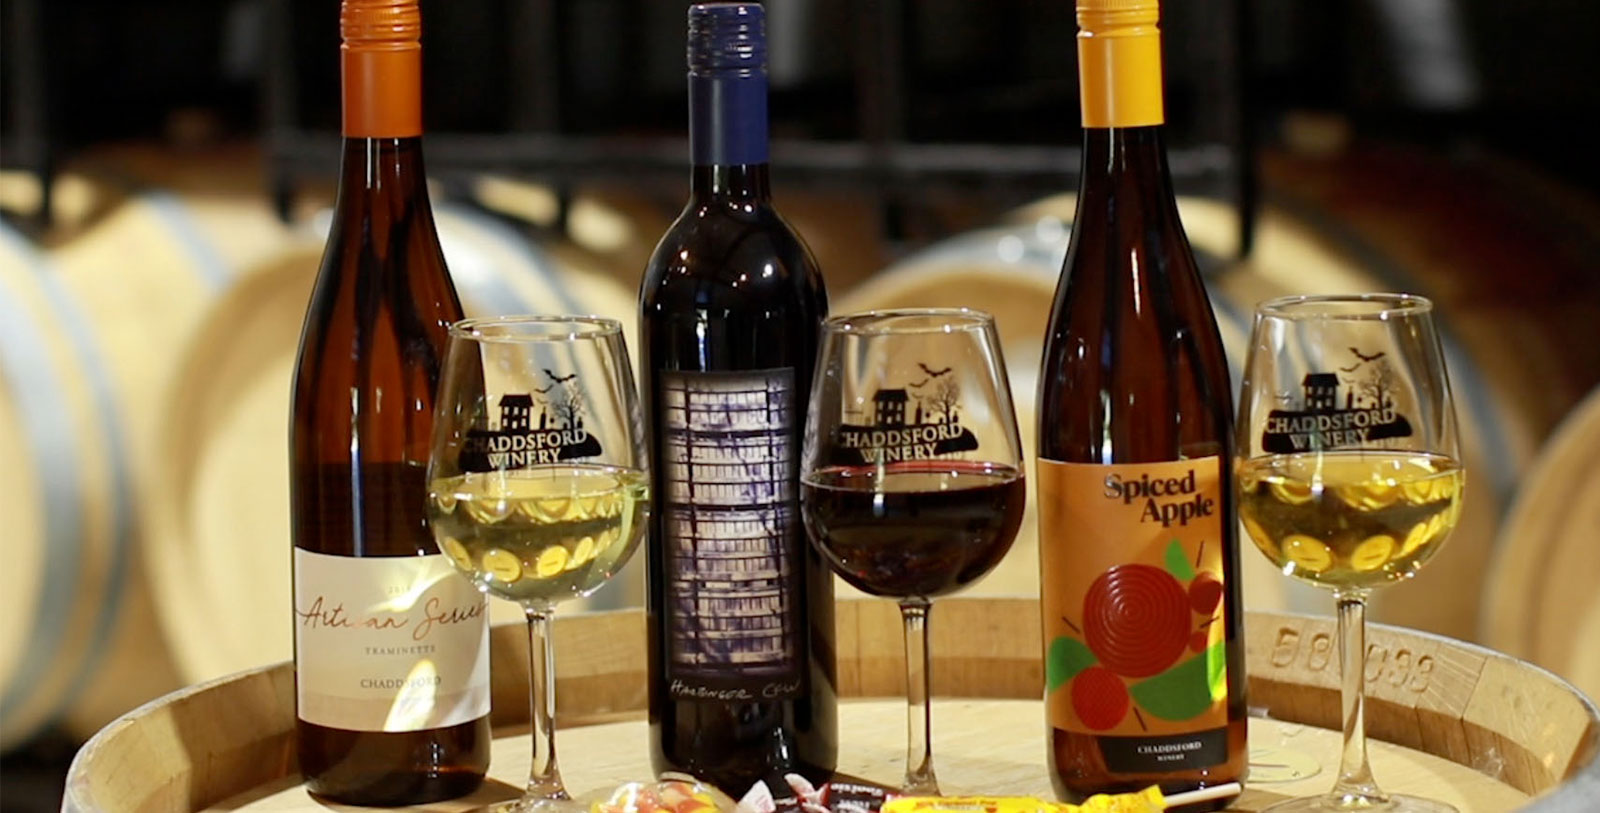 Taste the "Taste of West Chester" at the various nearby wineries and breweries.